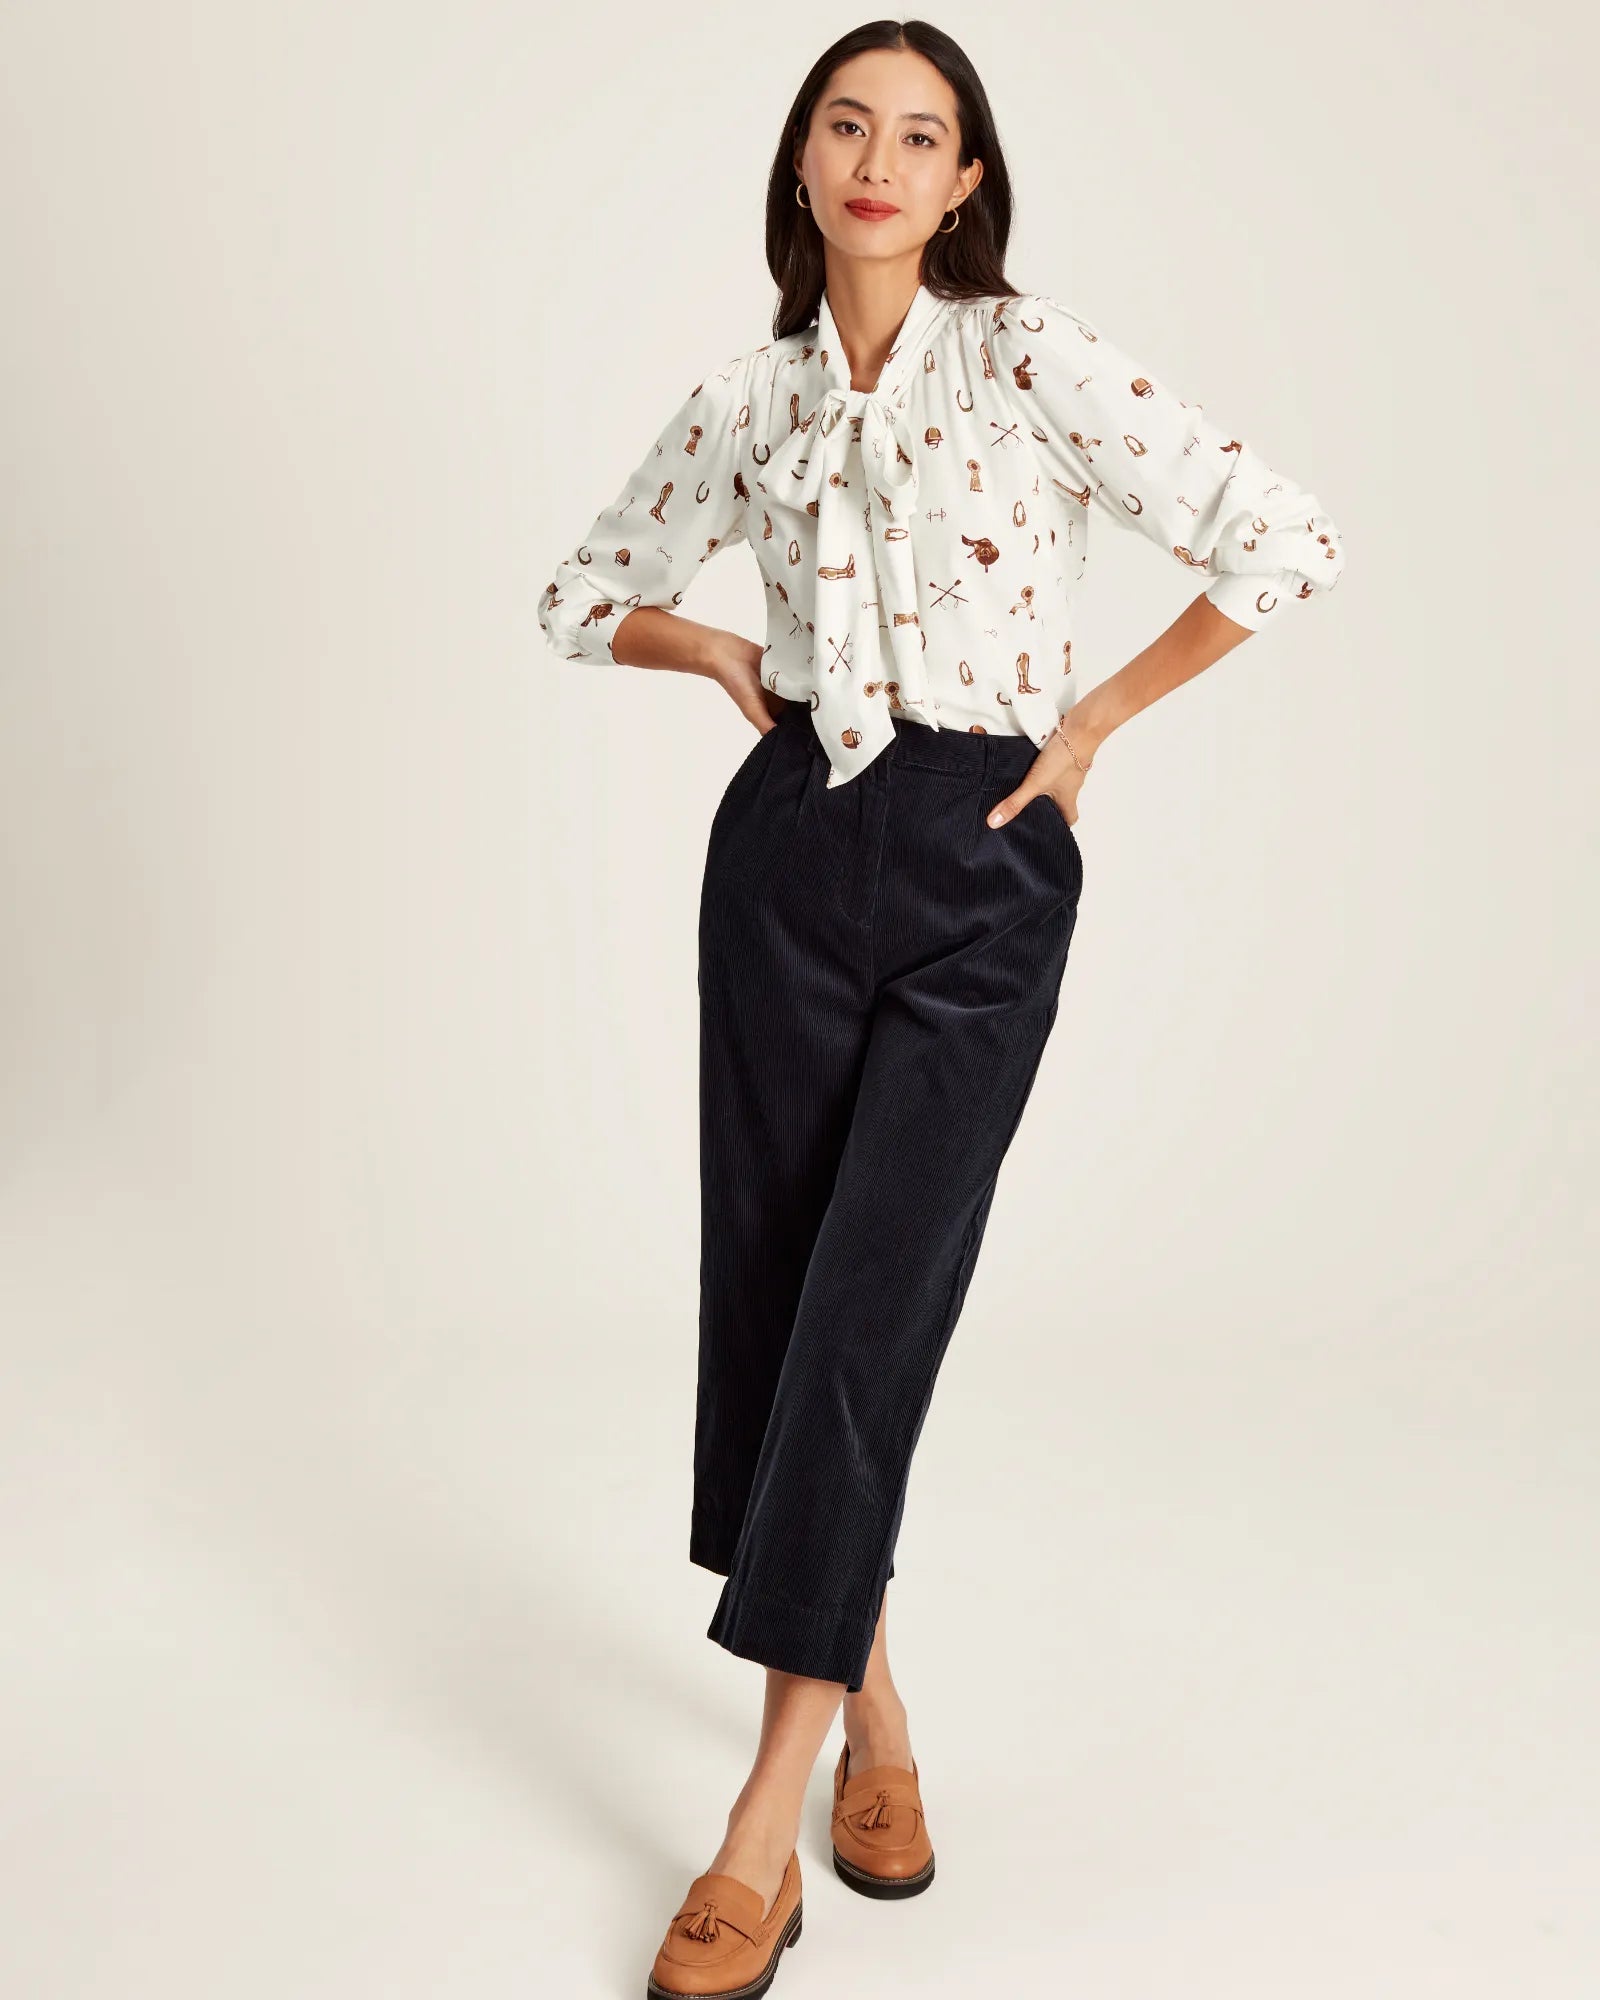 Everly Tie Neck Blouse - Equestrian Print